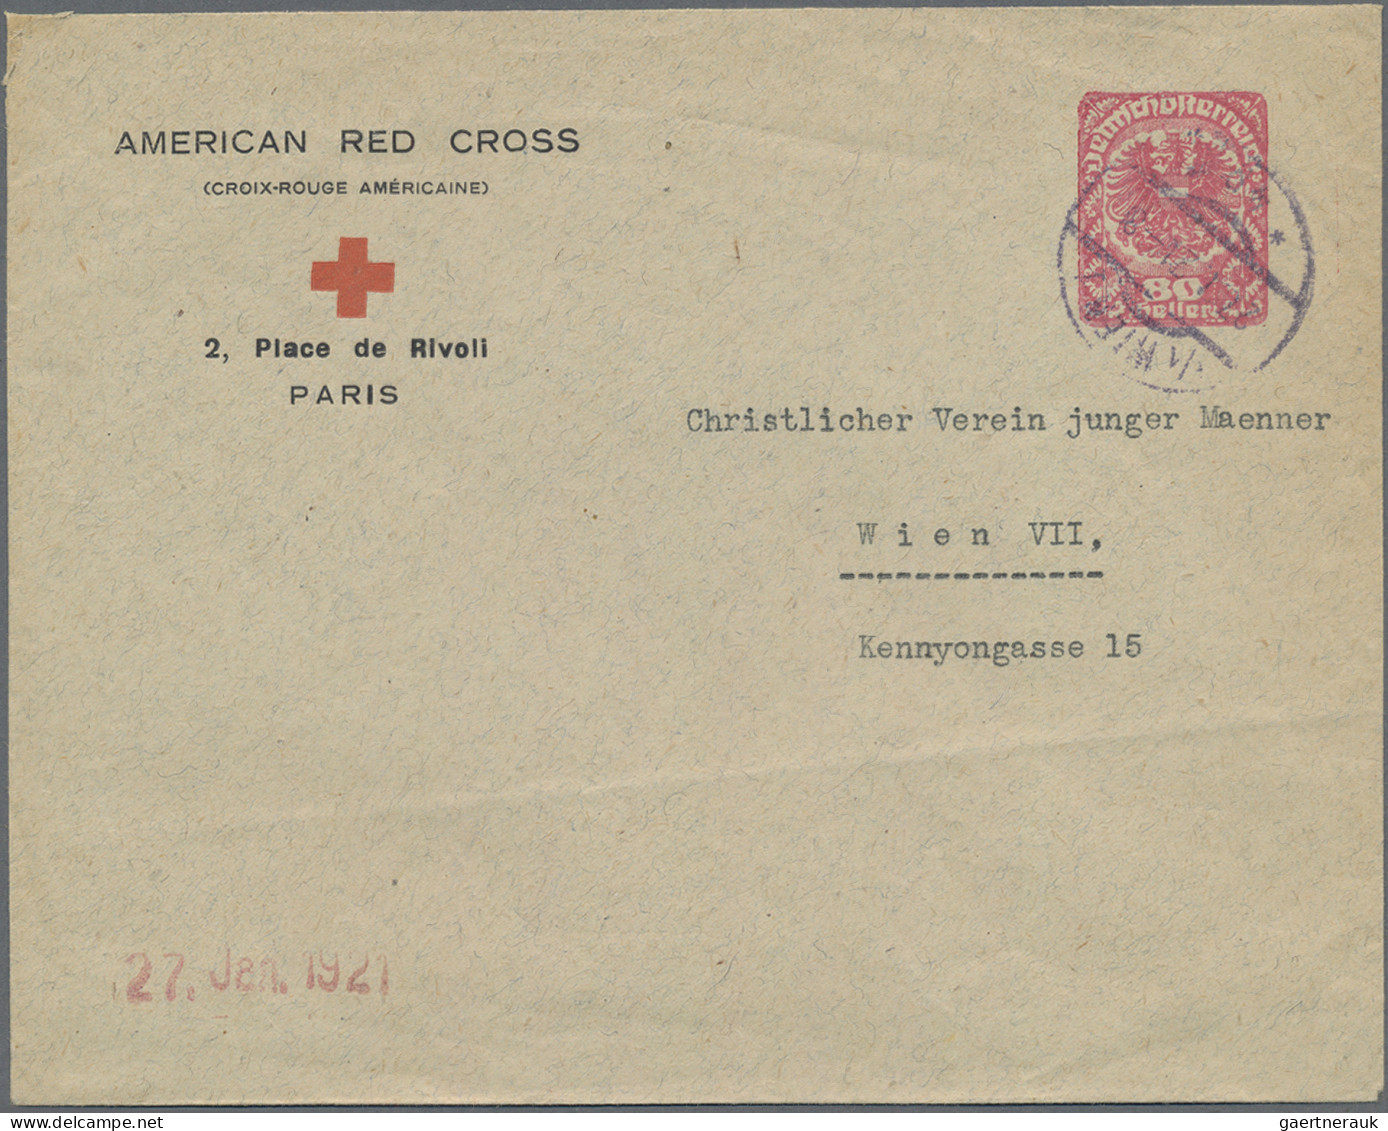 Thematics: Red Cross: 1921, "AMERICAN RED CROSS" (CROIX-ROUGE AMERICAINE) 2, Pla - Croix-Rouge